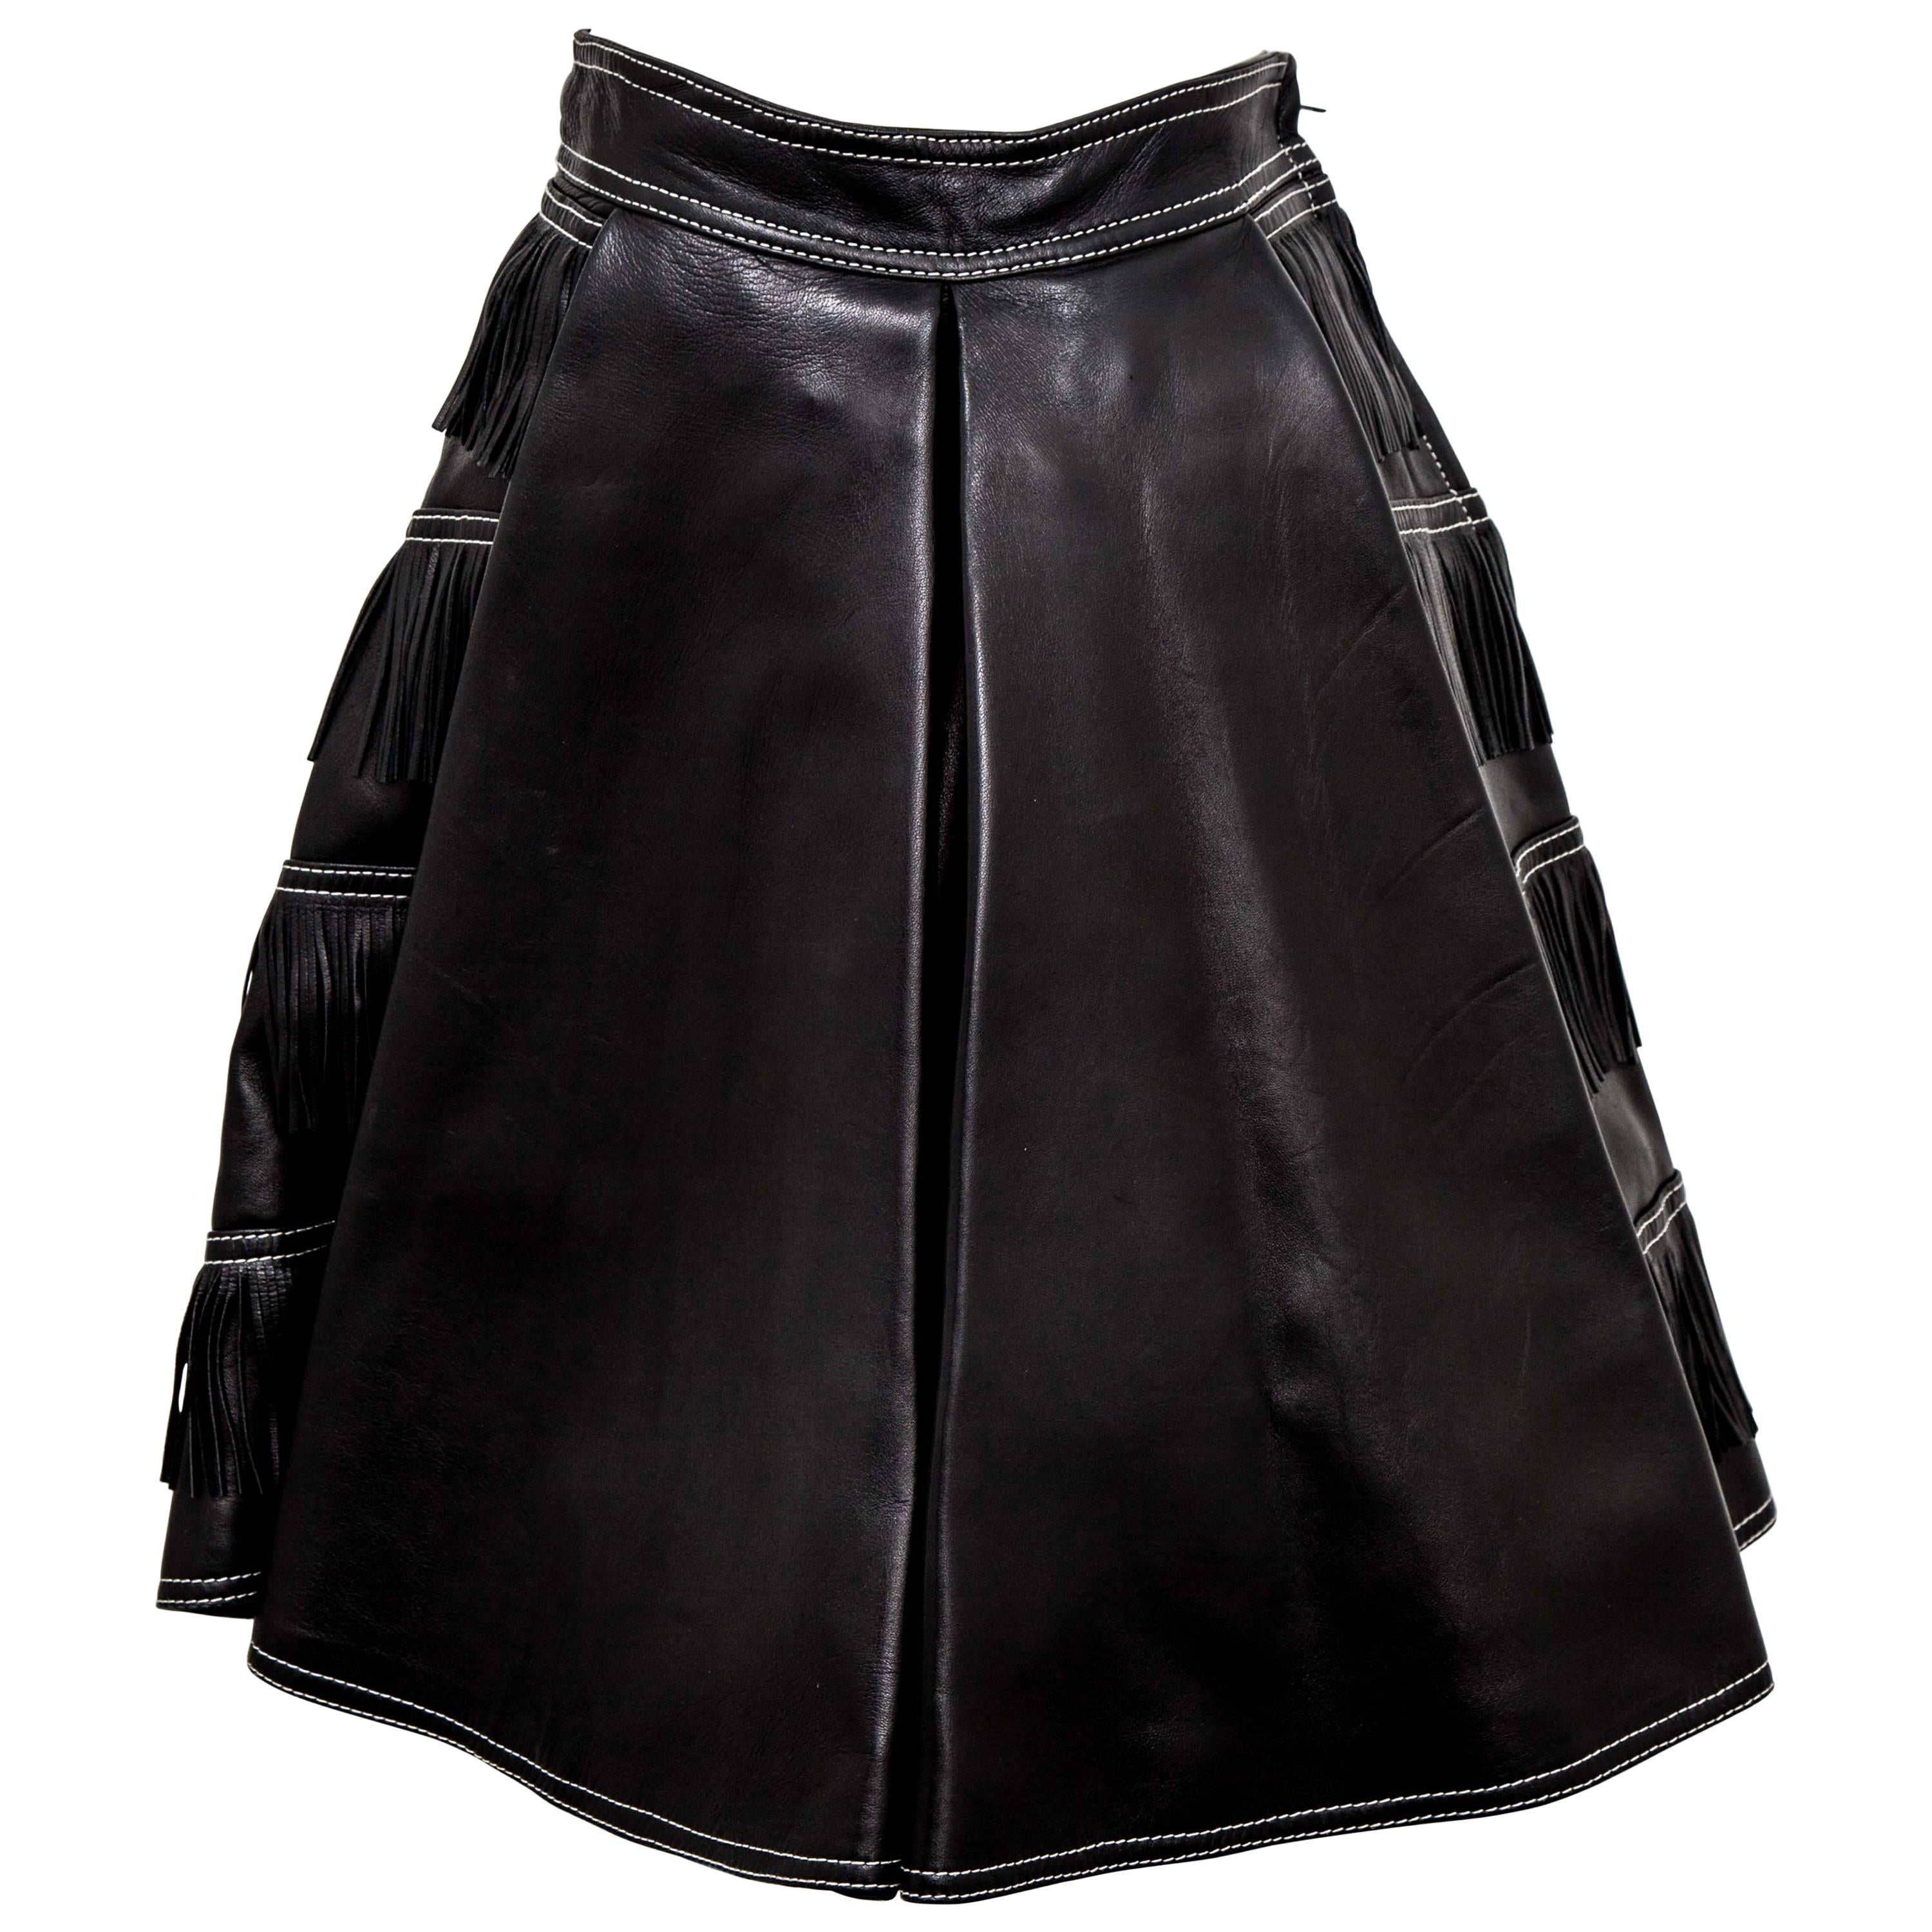 Gianni Versace iconic leather fringe skirt in black from 1992 collection. IT size 38.